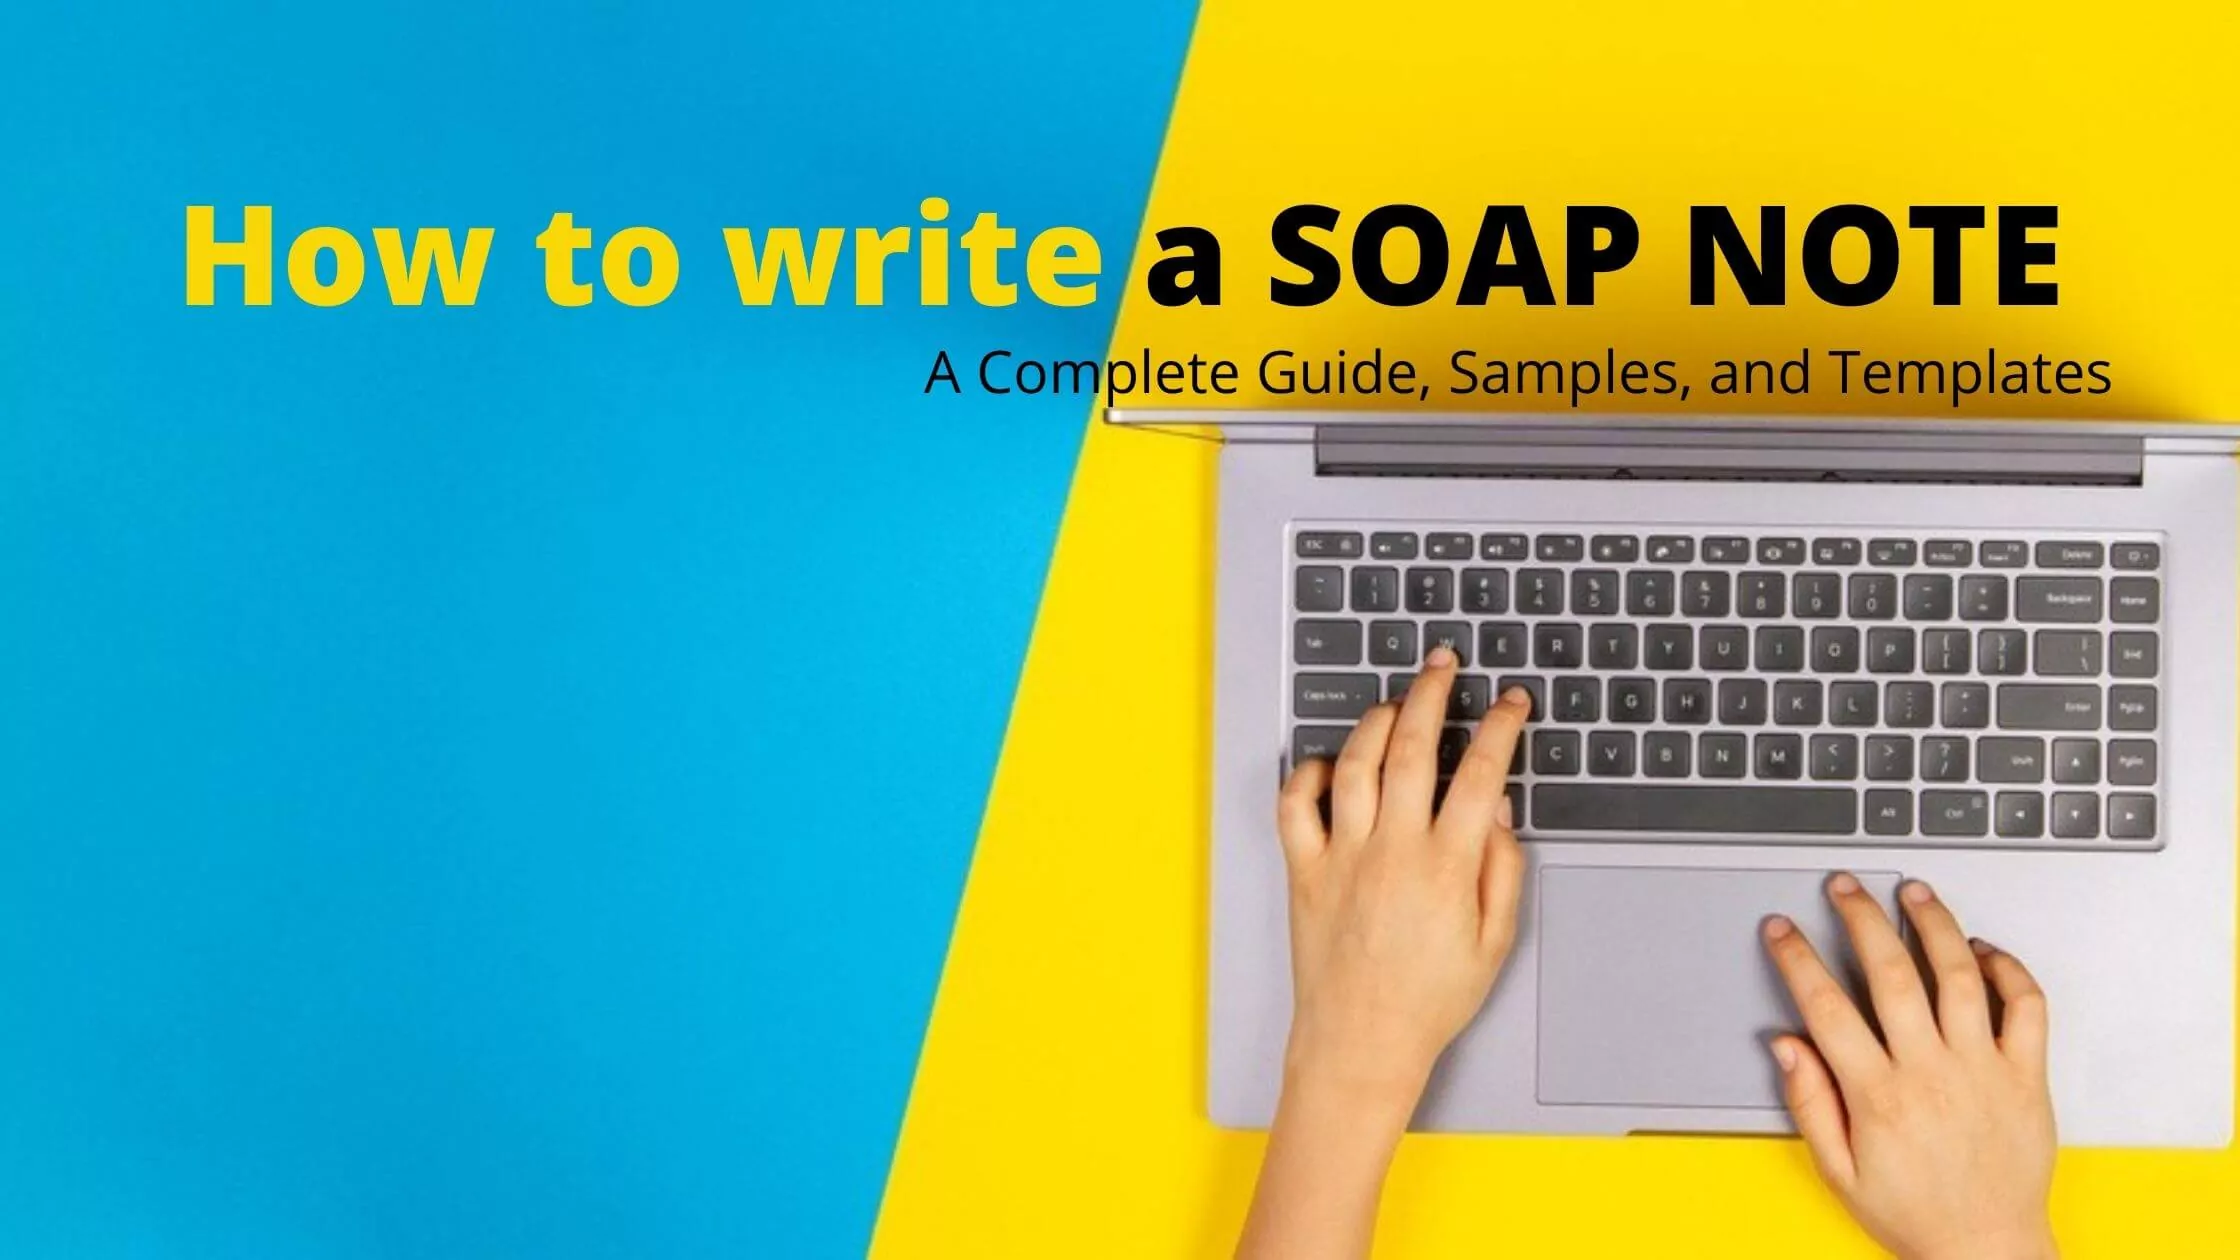 How to write a SOAP Note - A Guide